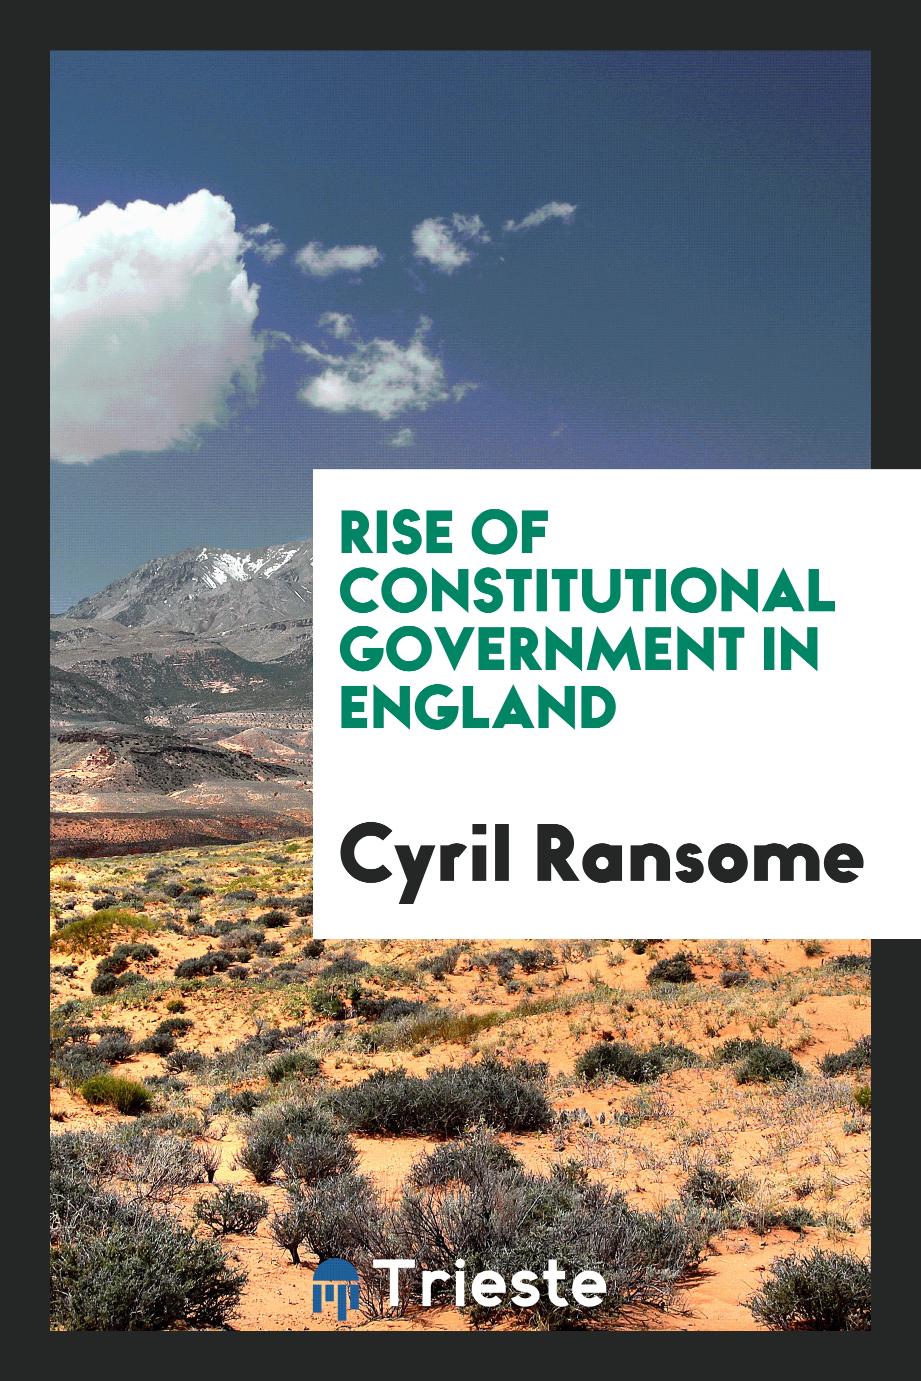 Rise of constitutional government in England